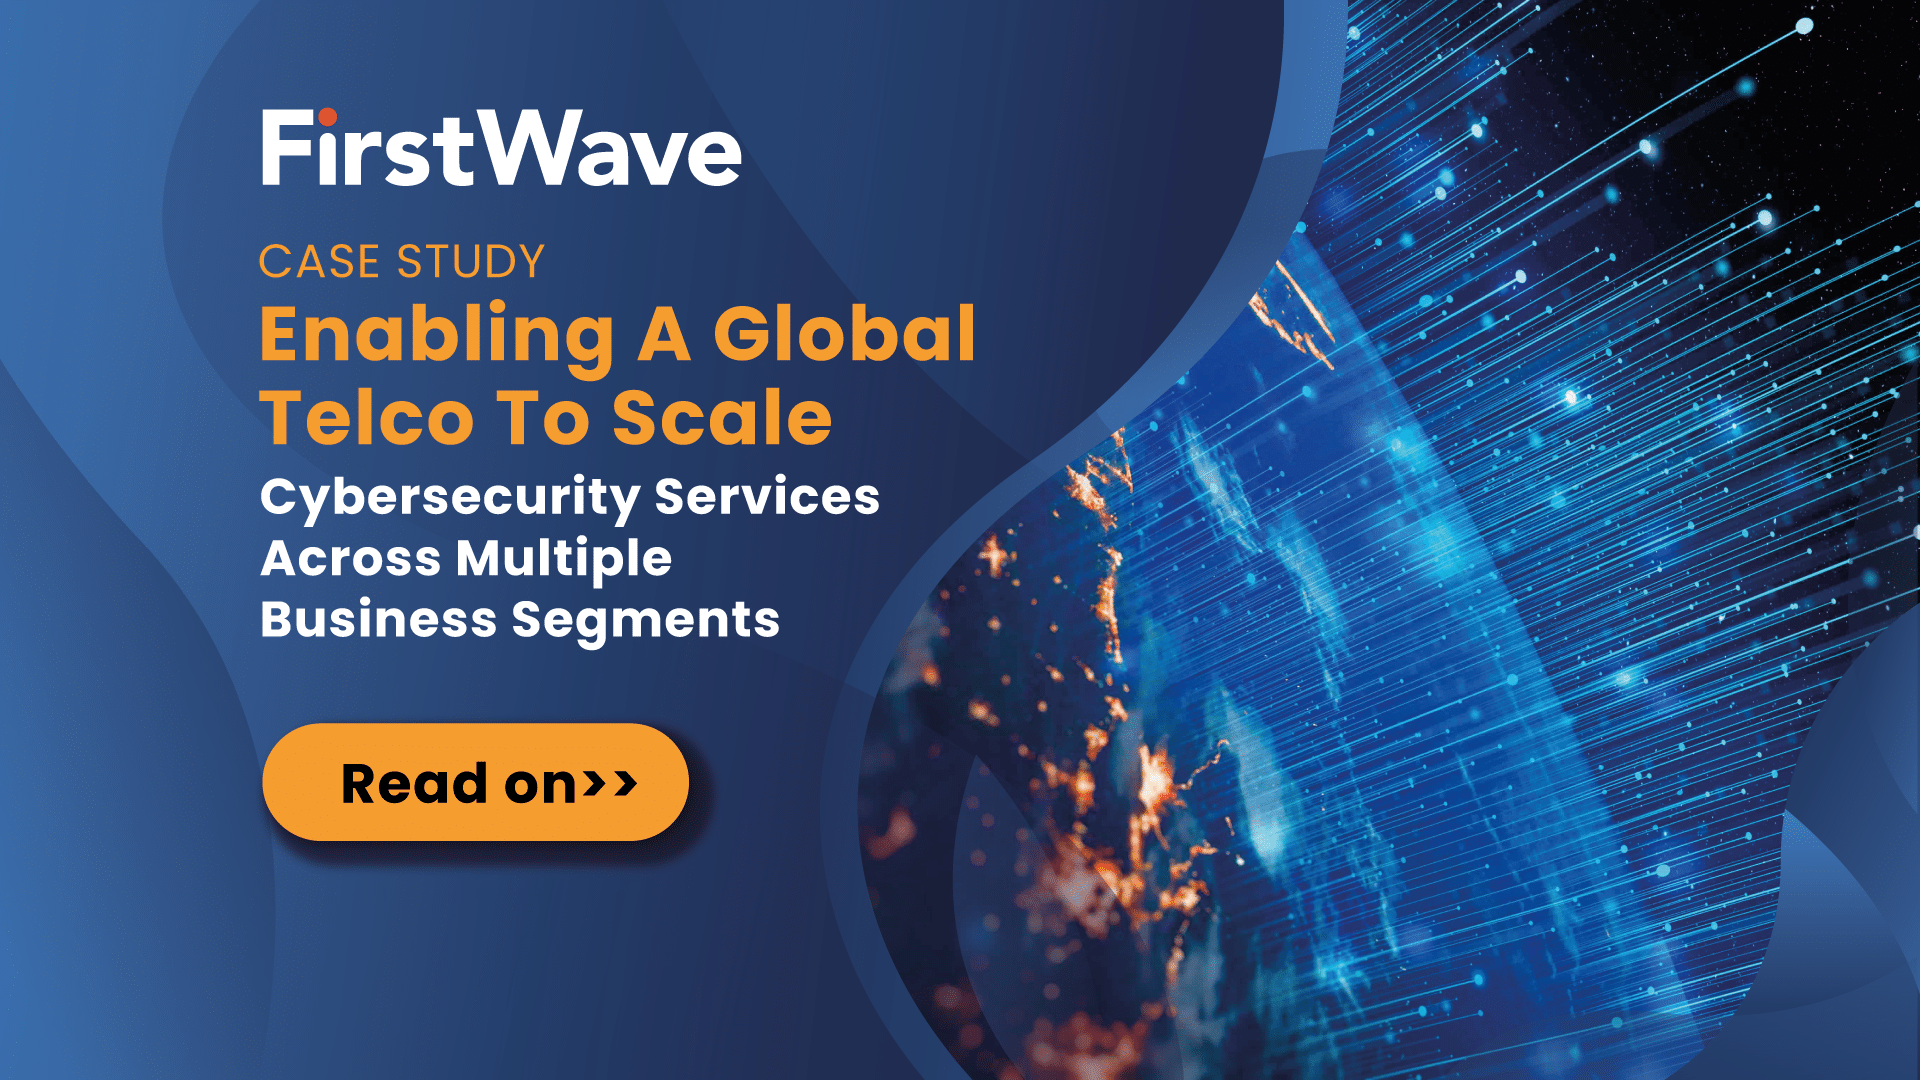 [Case Study] Enabling a global telco to scale cybersecurity